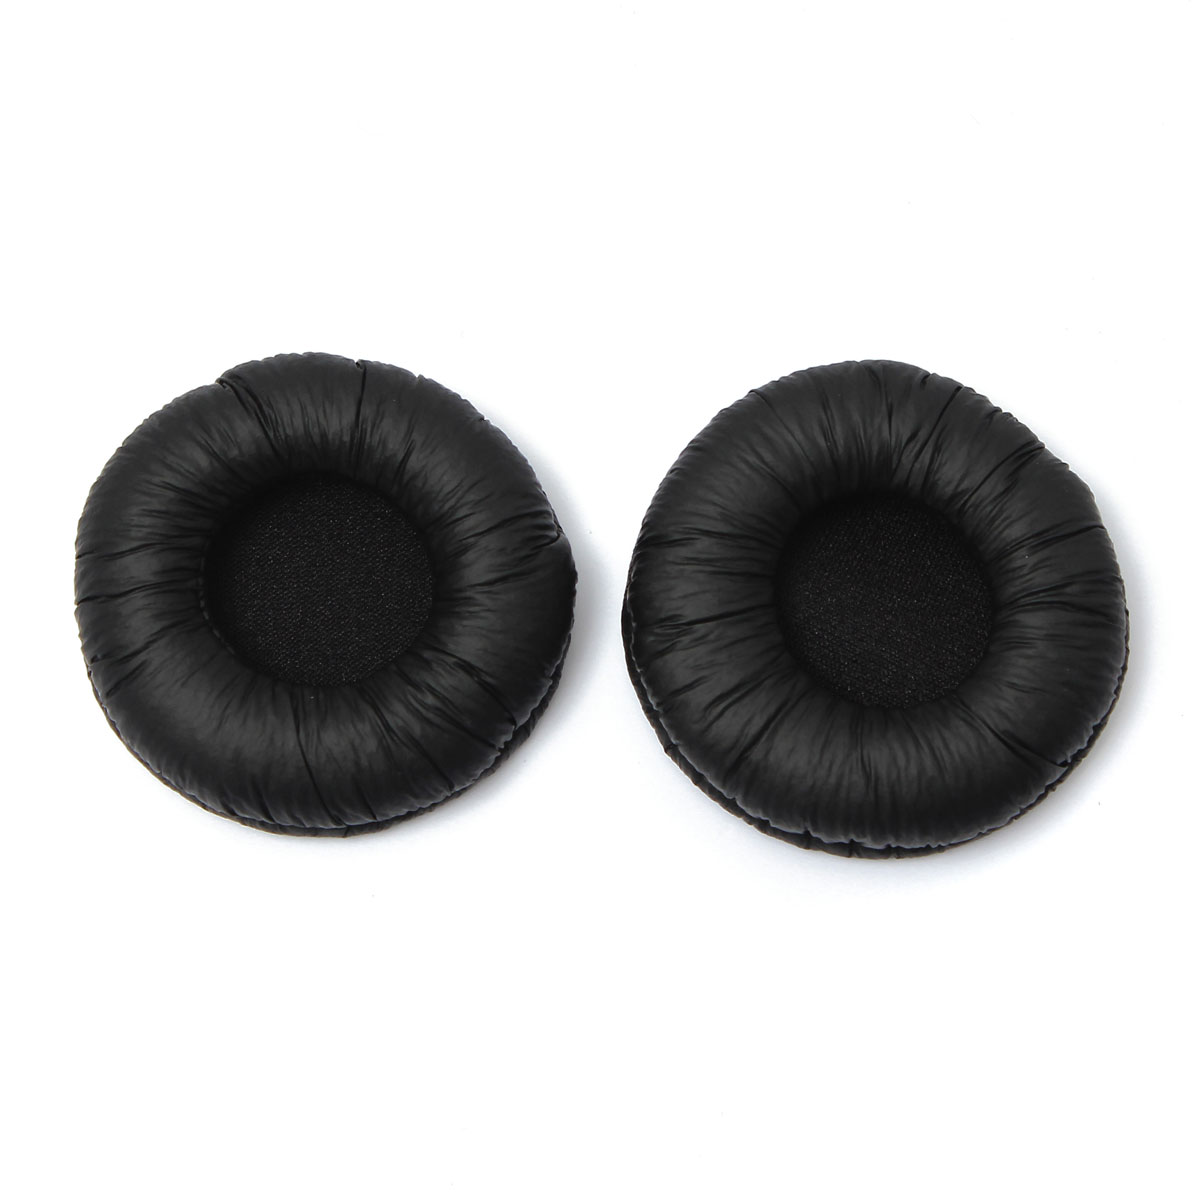 LEORY-1-Pair-For-Sennheiser-PX100-PX200-Headphone-Replacement-Ear-Pads-Cover-Headband-Cushion-1782024-2